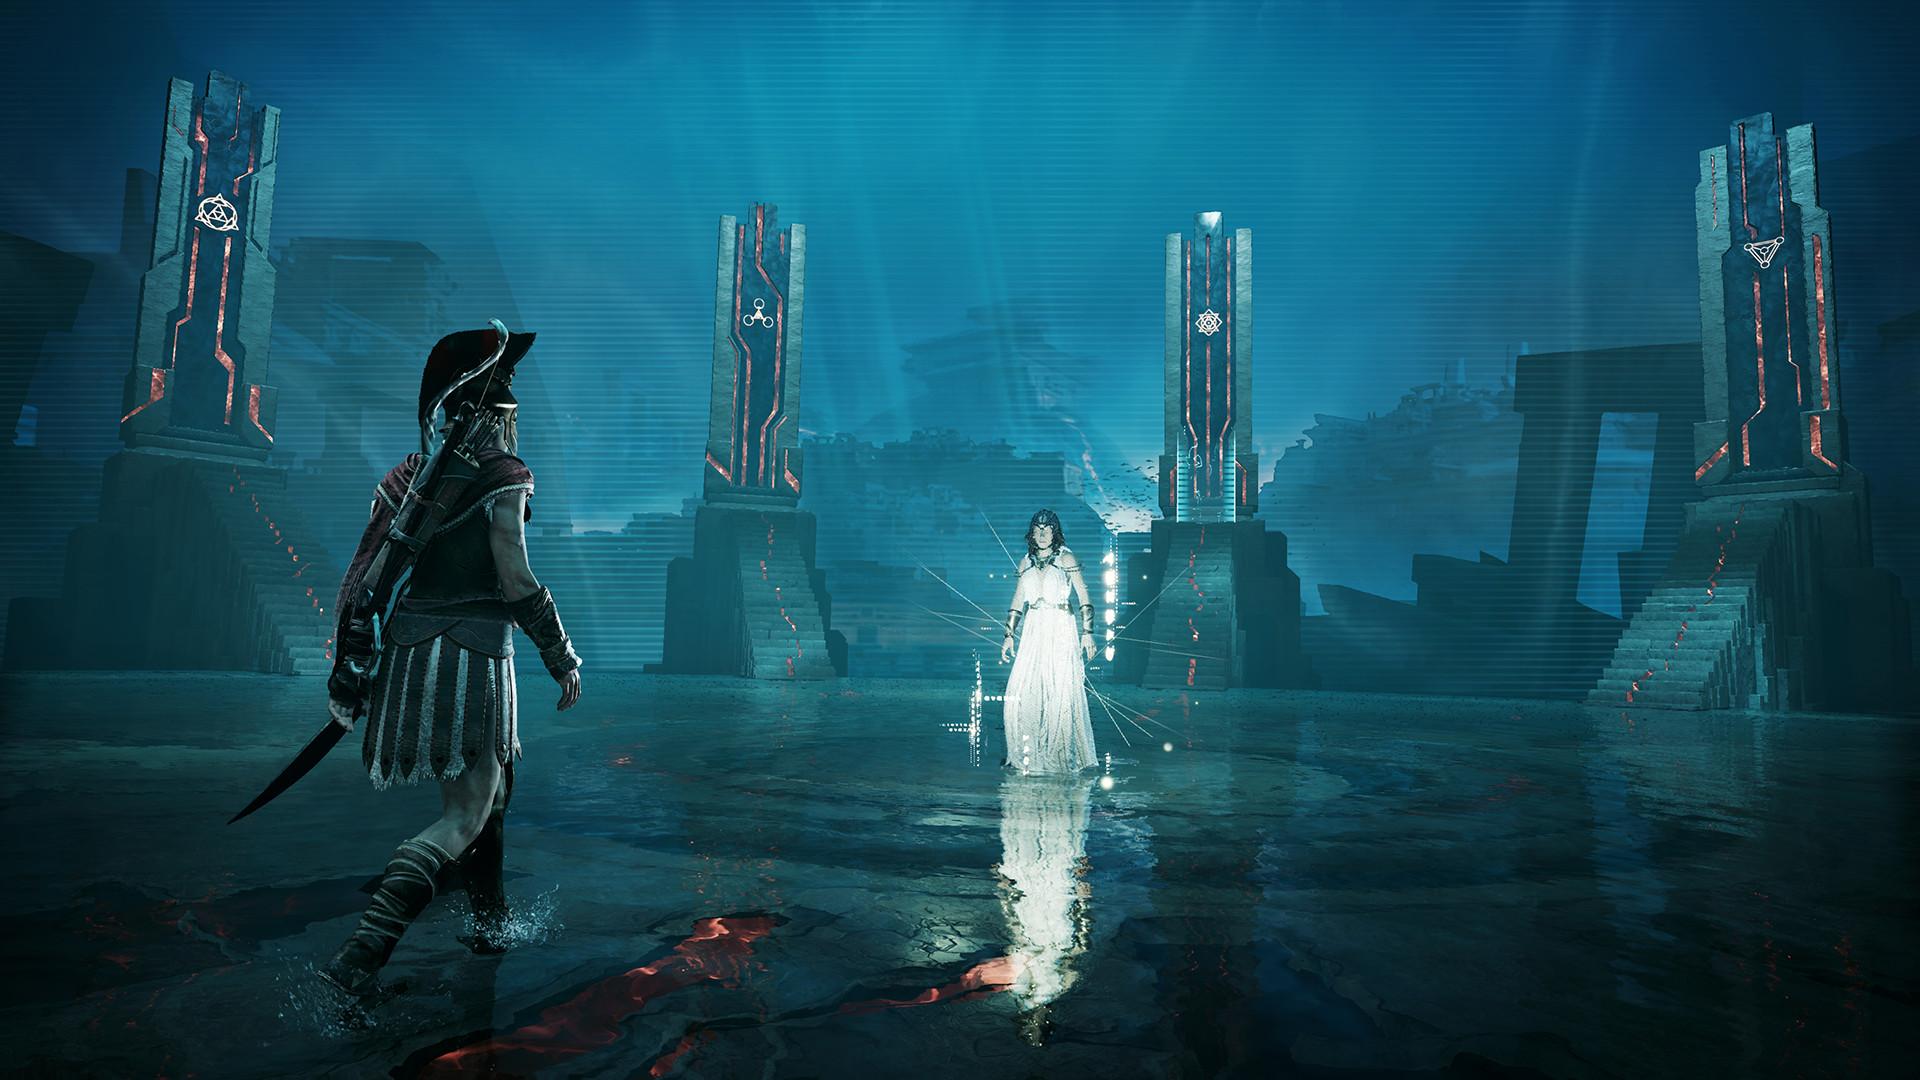 Part two of Assassin's Creed Odyssey's Fate of Atlantis DLC out next